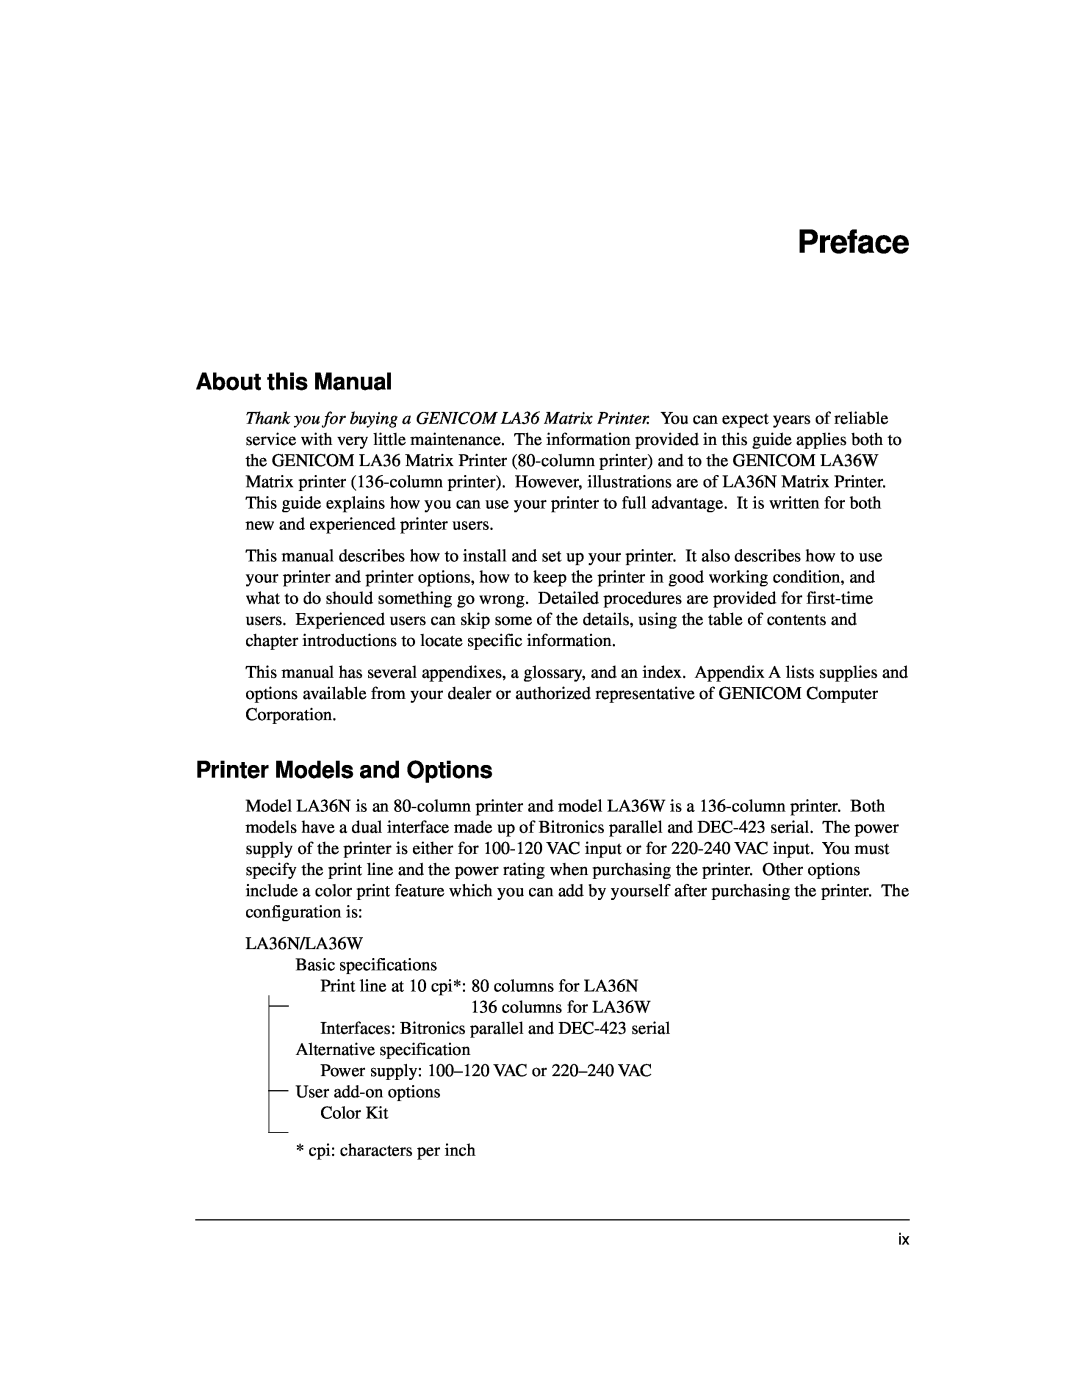 Genicom LA36 manual Preface, About this Manual, Printer Models and Options 